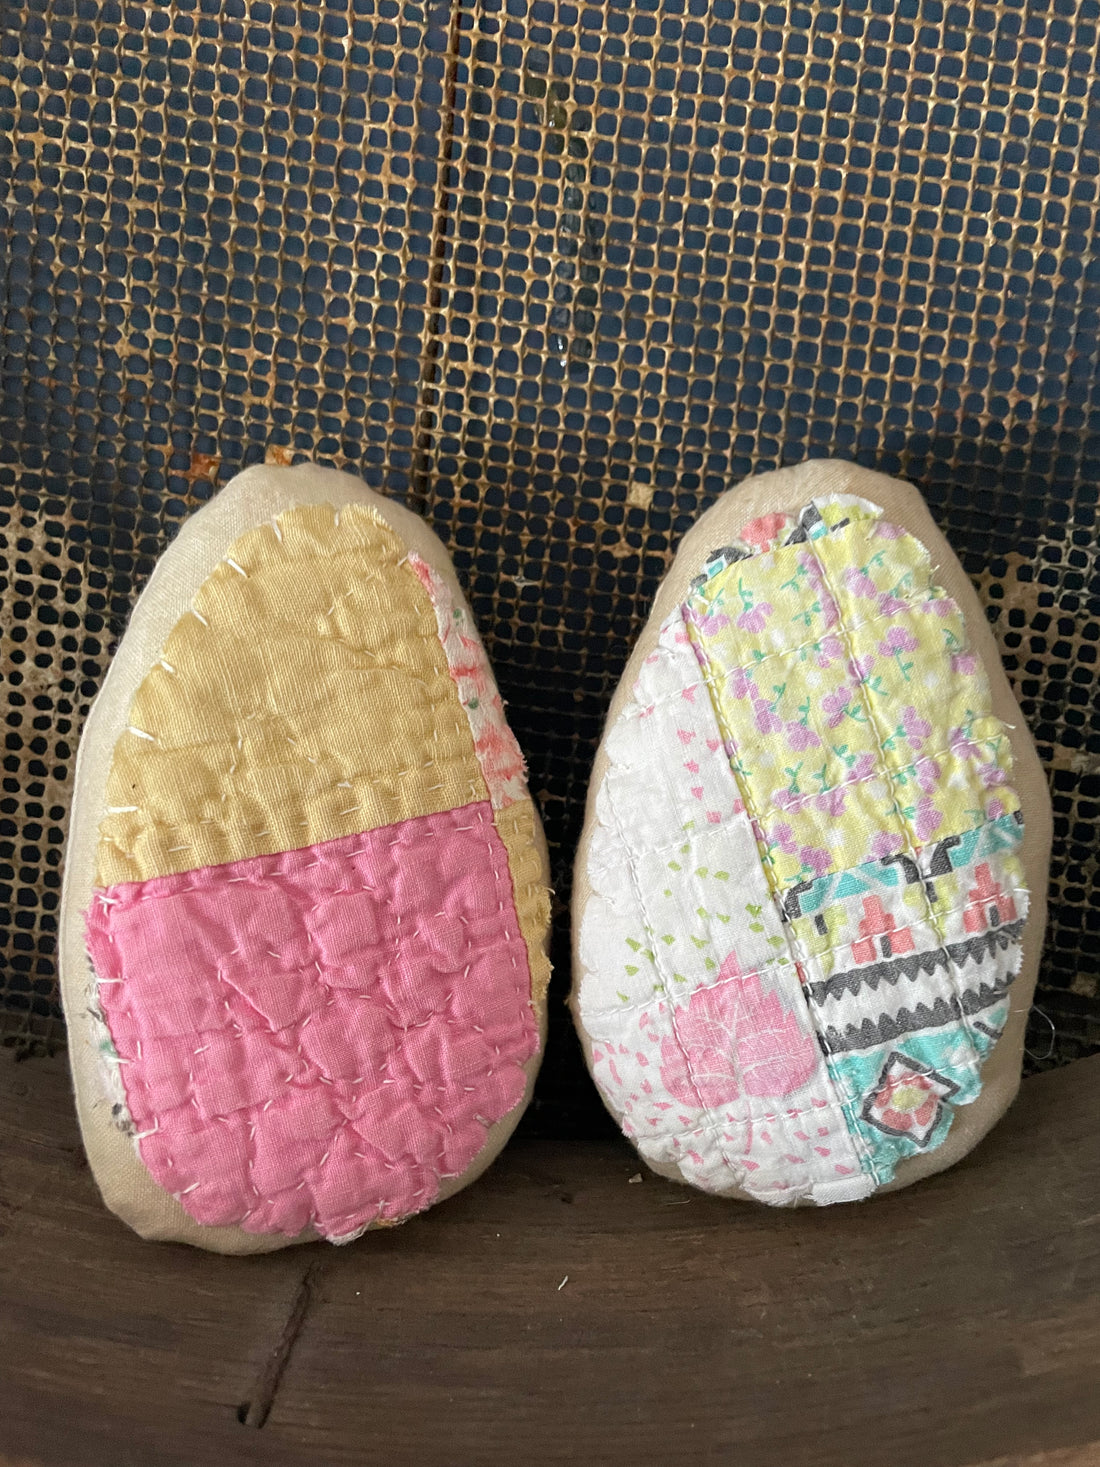 Handcrafted Spring 5” Quilted Fabric Easter Egg Ornament One pc.